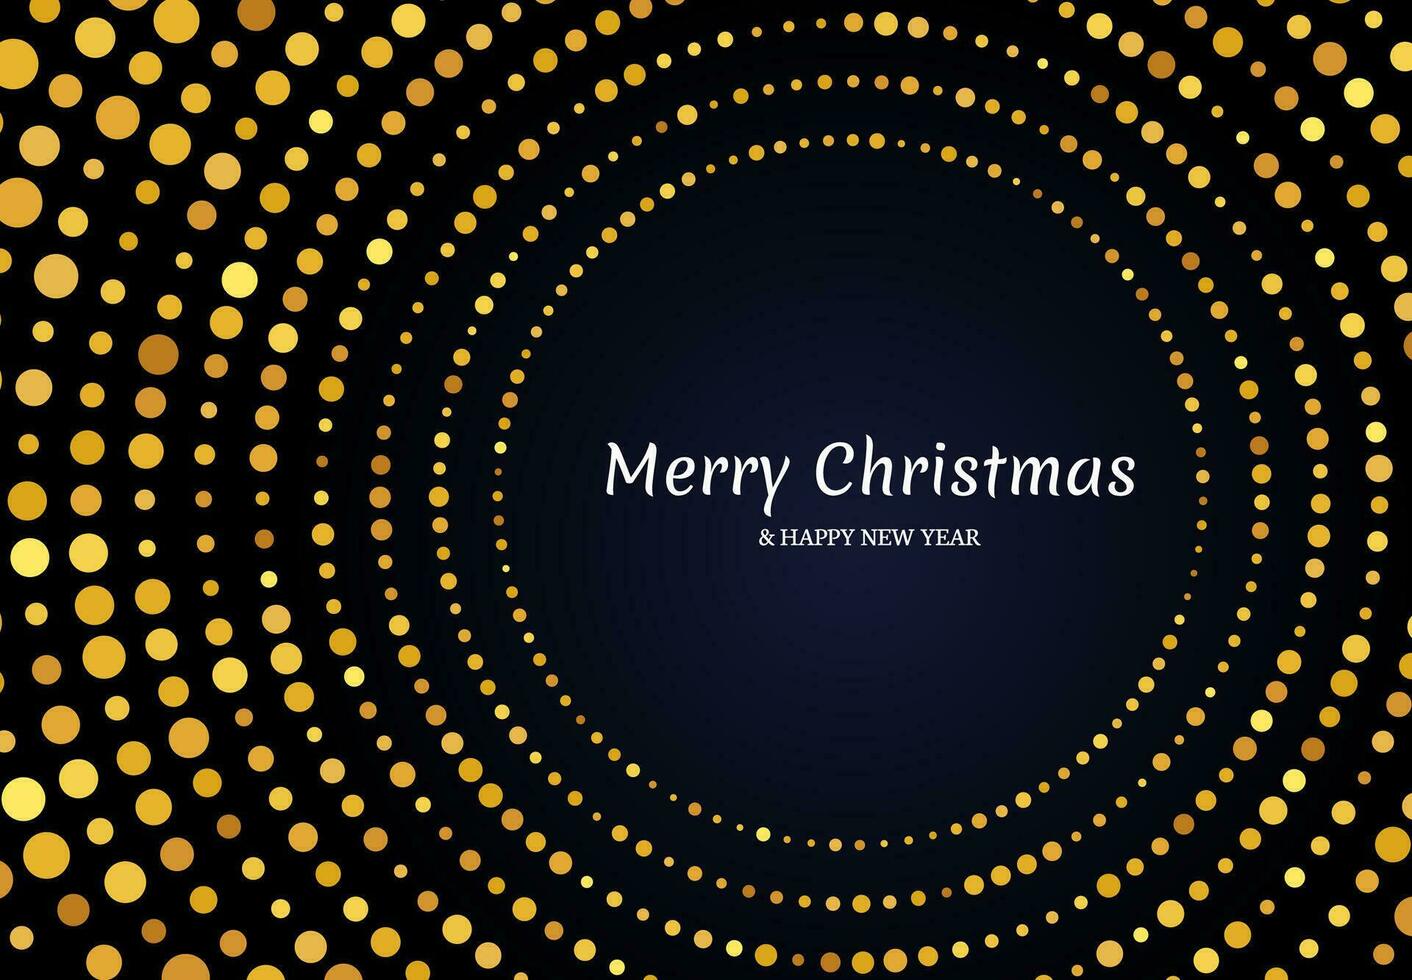 Merry Christmas of gold glitter pattern vector